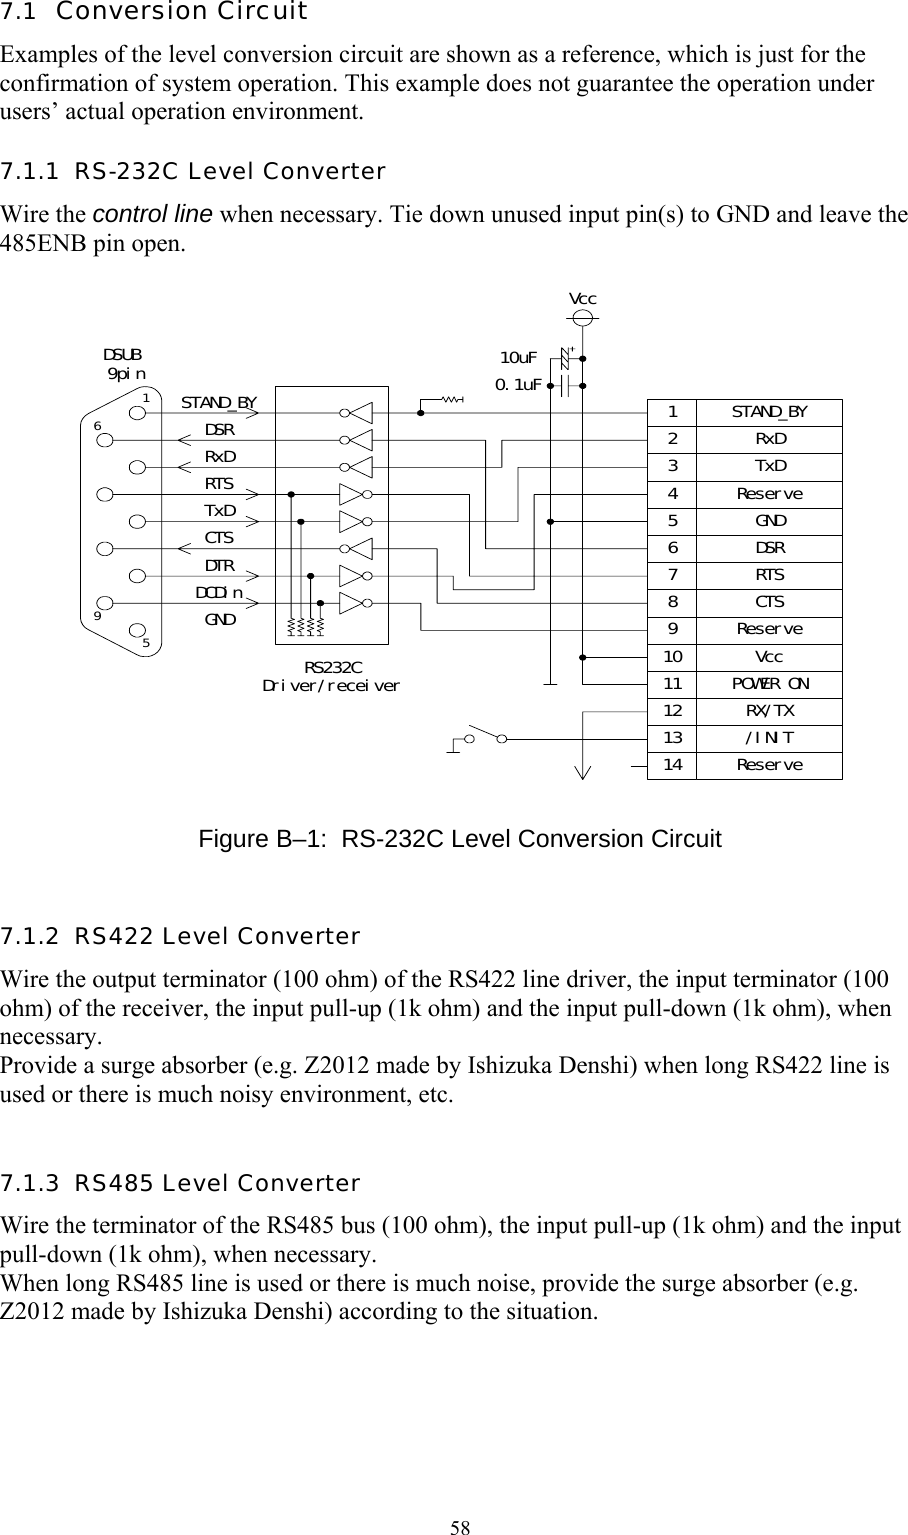  587.1  Conversion Circuit Examples of the level conversion circuit are shown as a reference, which is just for the confirmation of system operation. This example does not guarantee the operation under users’ actual operation environment. 7.1.1  RS-232C Level Converter Wire the control line when necessary. Tie down unused input pin(s) to GND and leave the 485ENB pin open.  1596STAND_BYDSRRxDRTSTxDCTSDTRDCDinGNDDSUB 9pinRS232CDriver/receiver1234567891011121314Vcc10uF0.1uFRxDTxDGNDDSRRTSCTSVccPOWER ONRX/TX/INITReserveSTAND_BYReserveReserve  Figure B–1:  RS-232C Level Conversion Circuit 7.1.2  RS422 Level Converter Wire the output terminator (100 ohm) of the RS422 line driver, the input terminator (100 ohm) of the receiver, the input pull-up (1k ohm) and the input pull-down (1k ohm), when necessary. Provide a surge absorber (e.g. Z2012 made by Ishizuka Denshi) when long RS422 line is used or there is much noisy environment, etc.  7.1.3  RS485 Level Converter Wire the terminator of the RS485 bus (100 ohm), the input pull-up (1k ohm) and the input pull-down (1k ohm), when necessary. When long RS485 line is used or there is much noise, provide the surge absorber (e.g. Z2012 made by Ishizuka Denshi) according to the situation.     